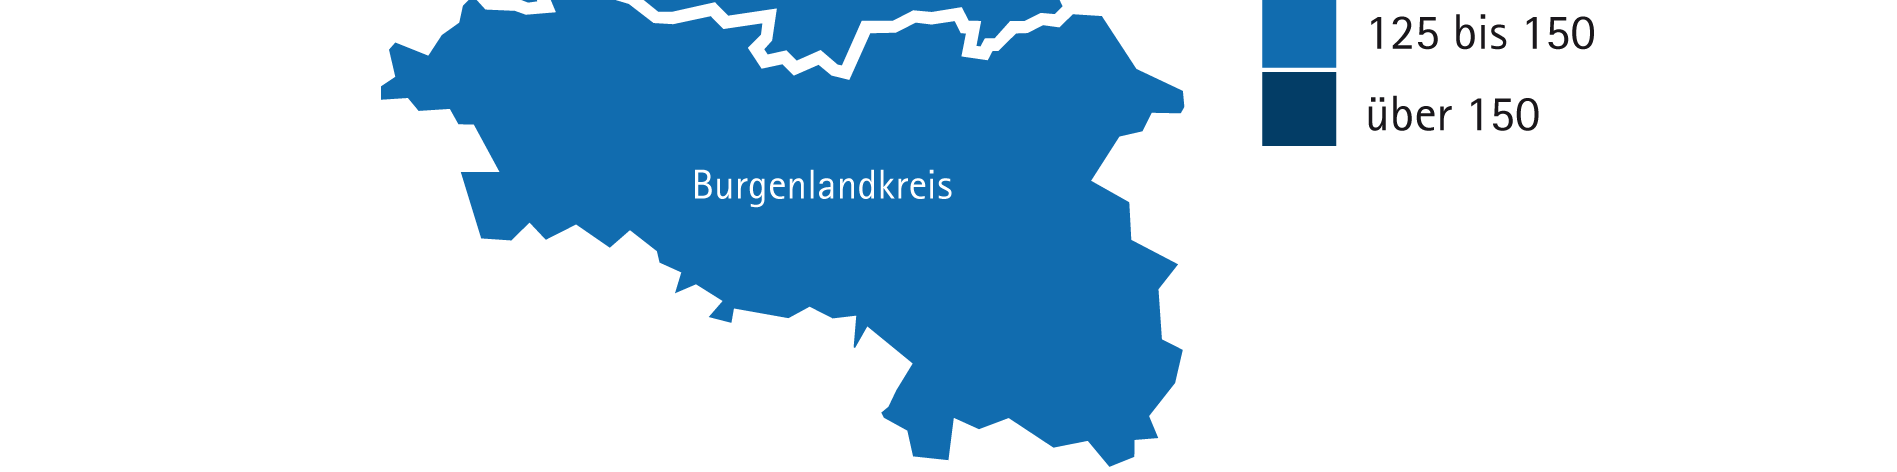 AREA AND POPULATION in the CCI Region of Halle-Dessau as of 31.12.